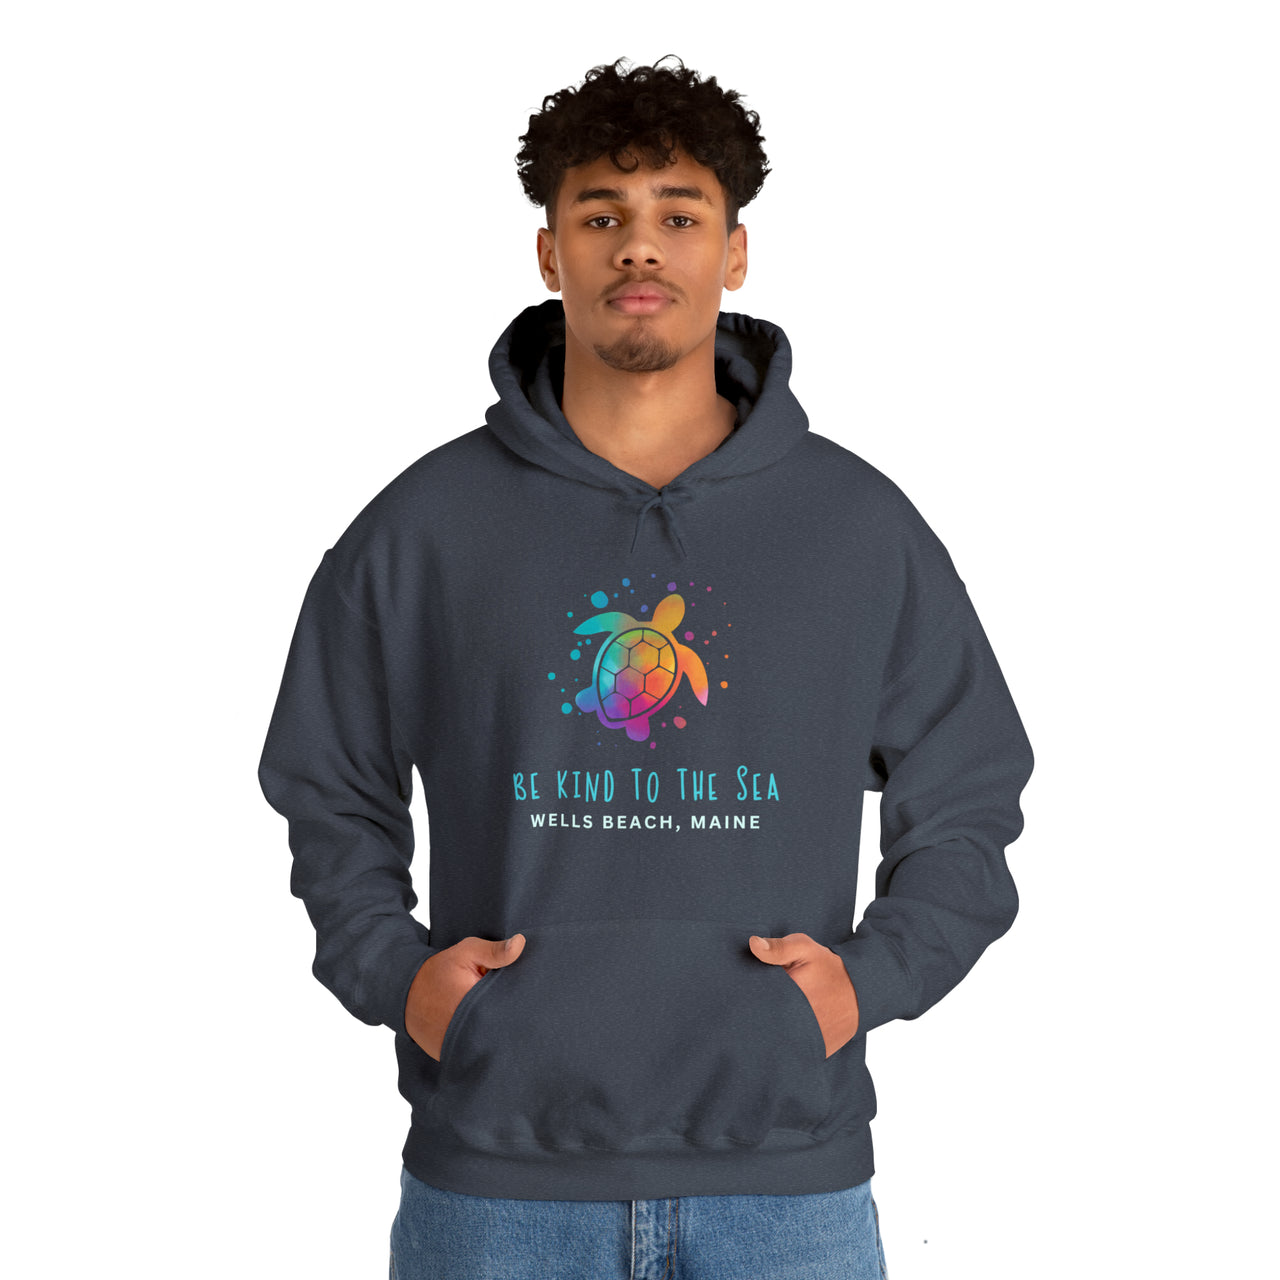 Be Kind To The Sea Personalized Heavy Blend Heather Navy Hooded Sweatshirt